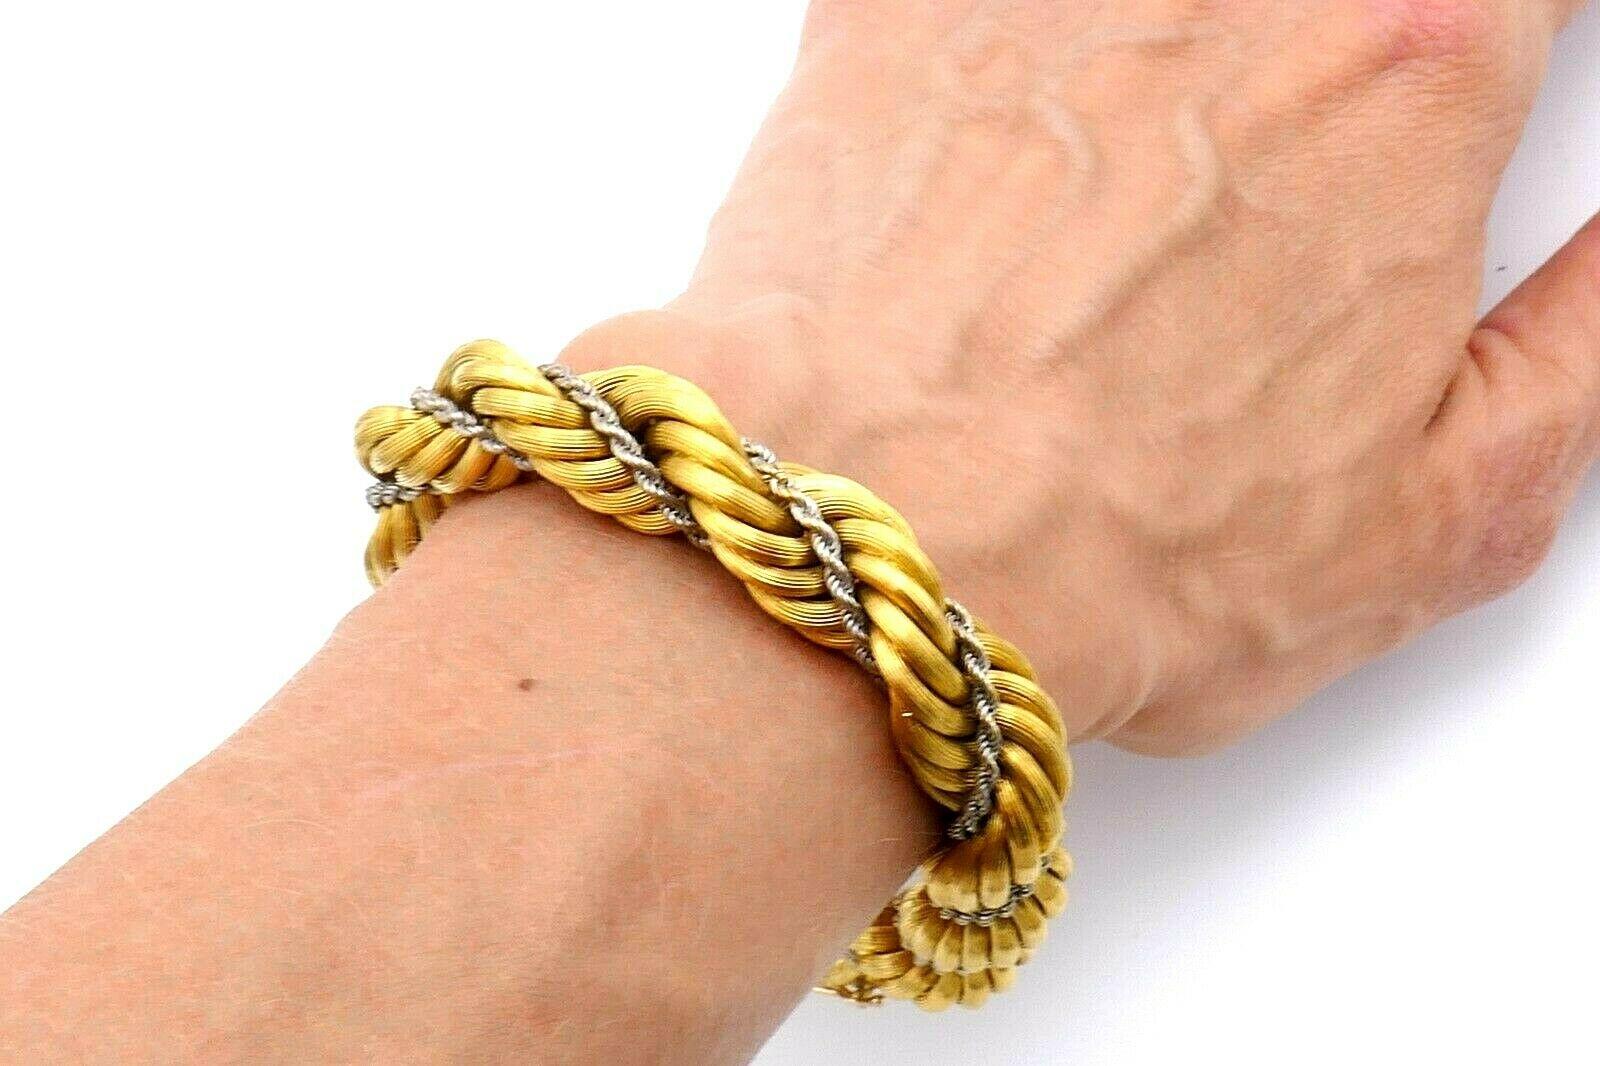 Woven rope chain bracelet made of 18k yellow and white gold. Textured; circa 1970s. Stamped with a hallmark for 18k gold and a maker's mark. Measurements: 8.5